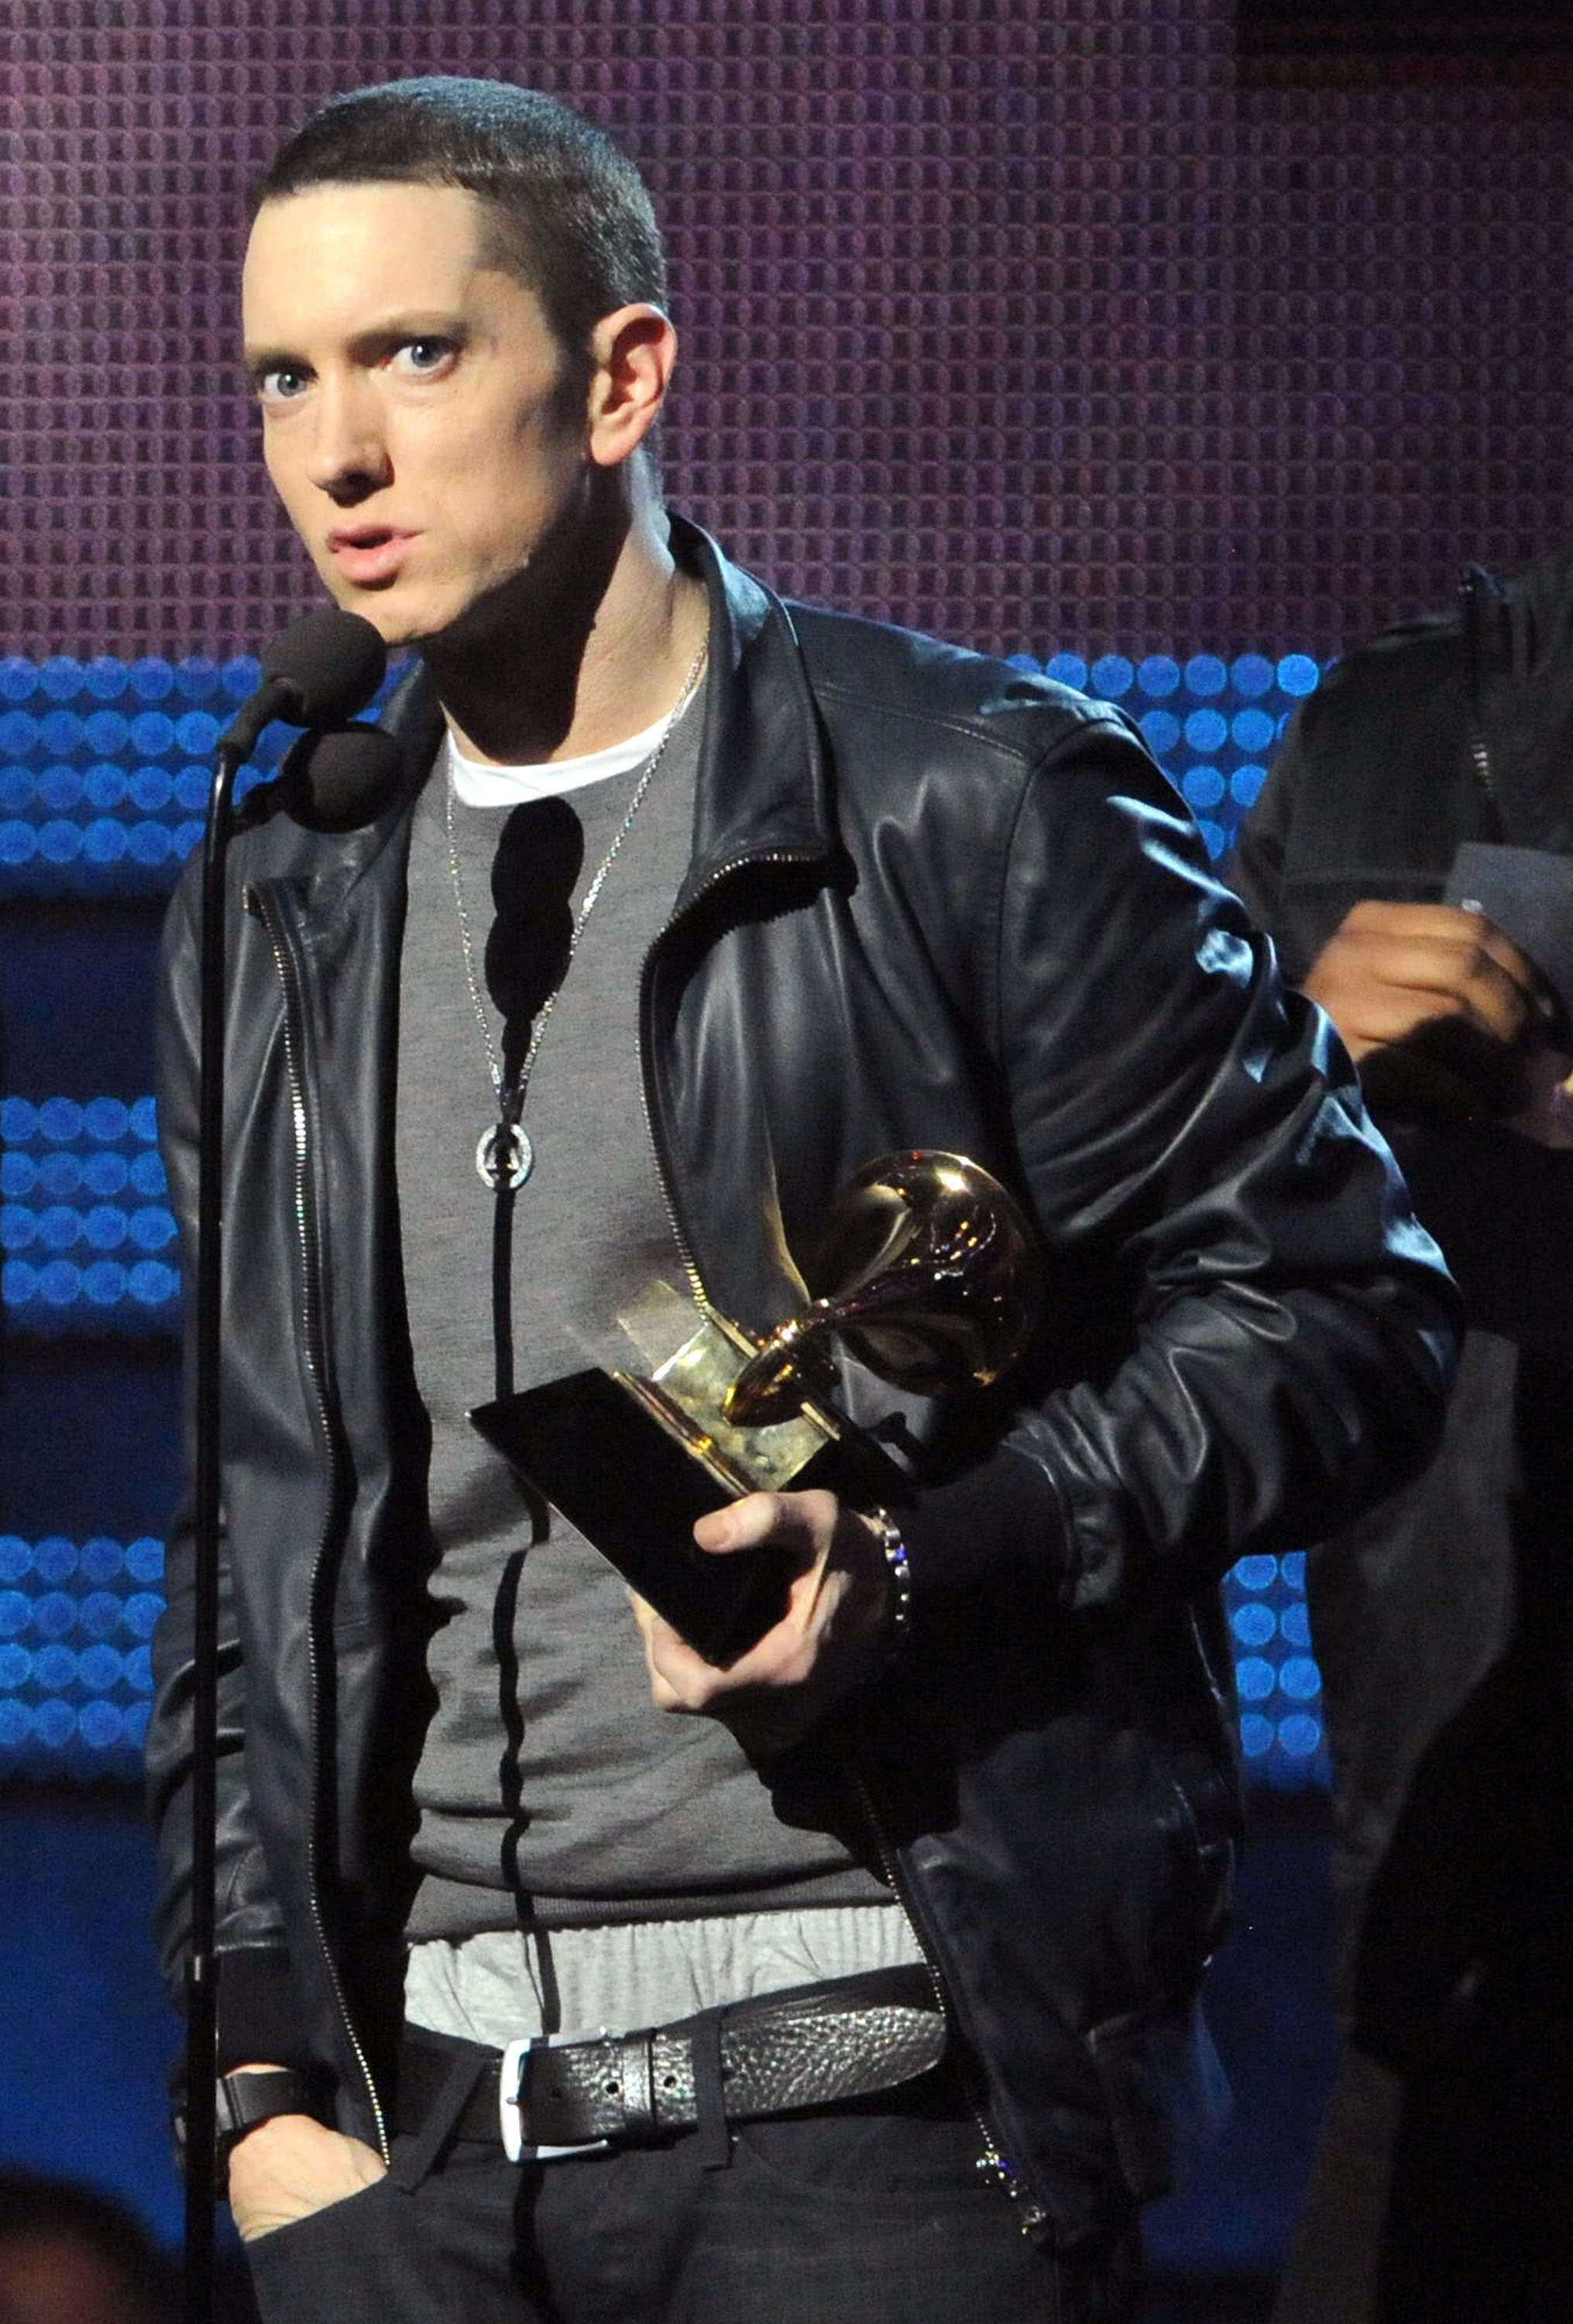 Eminem during the 53rd Annual Grammy Awards on February 13, 2011 in Los Angeles, California. | Source: Getty Images